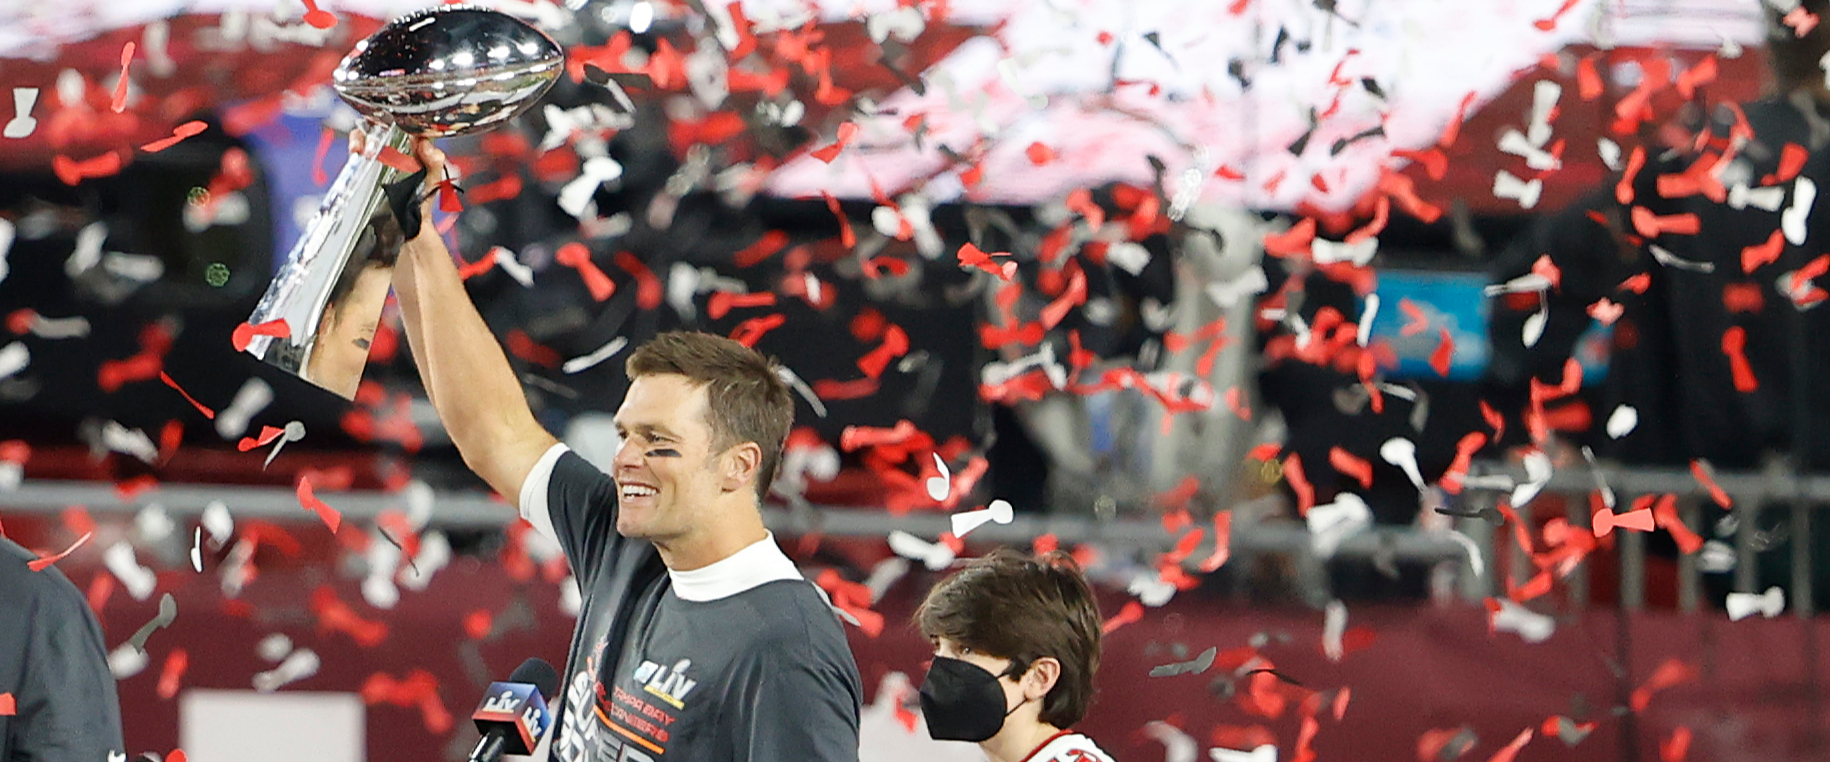 The Tampa Bay Buccaneers are Super Bowl Champions.